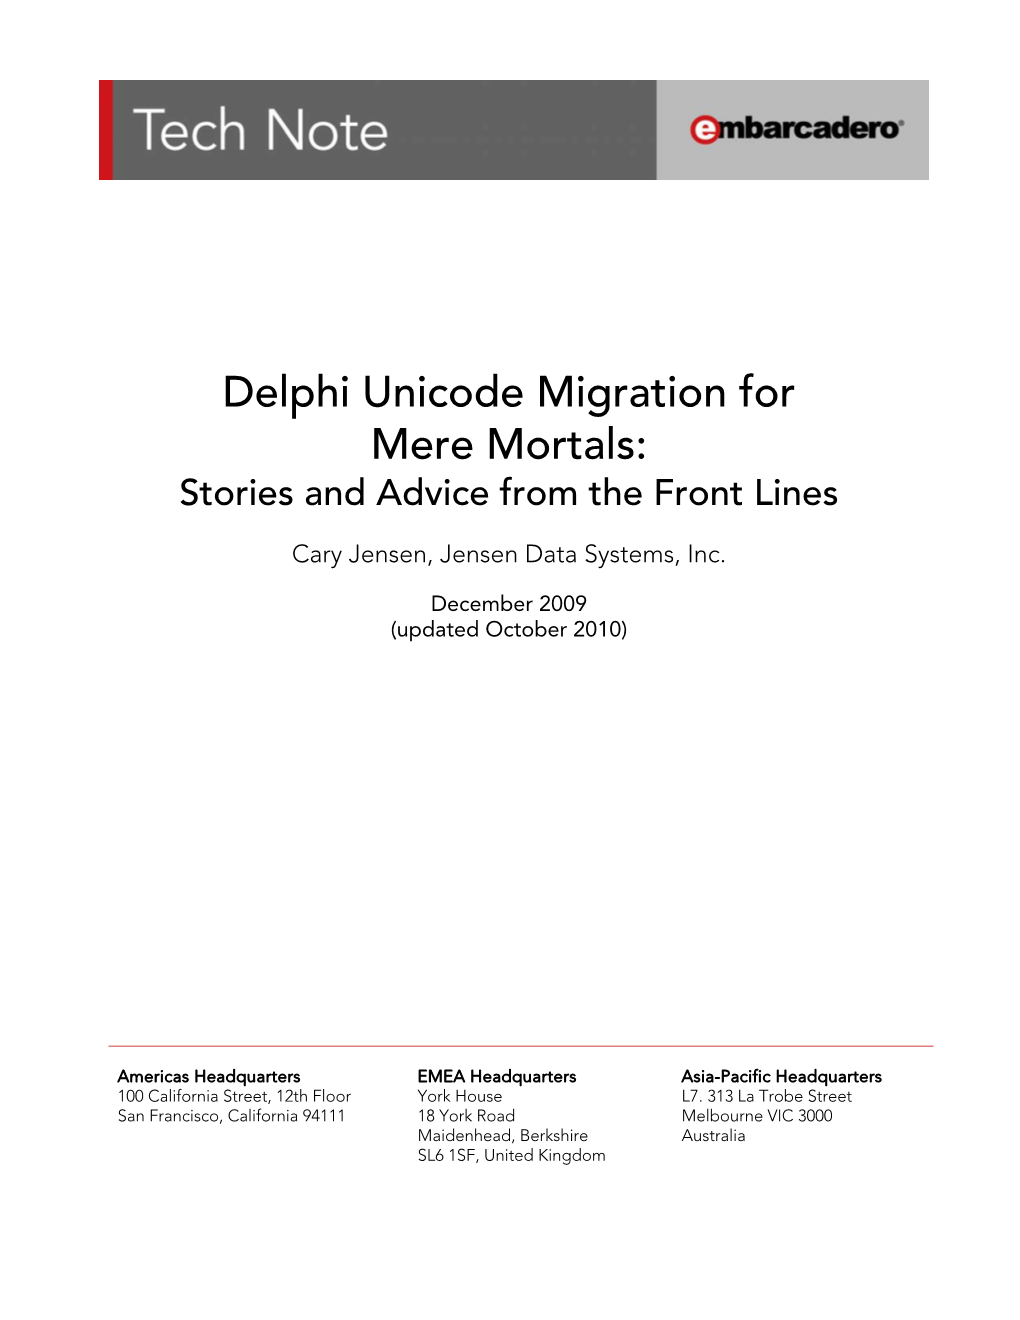 Delphi Unicode Migration for Mere Mortals: Stories and Advice from the Front Lines